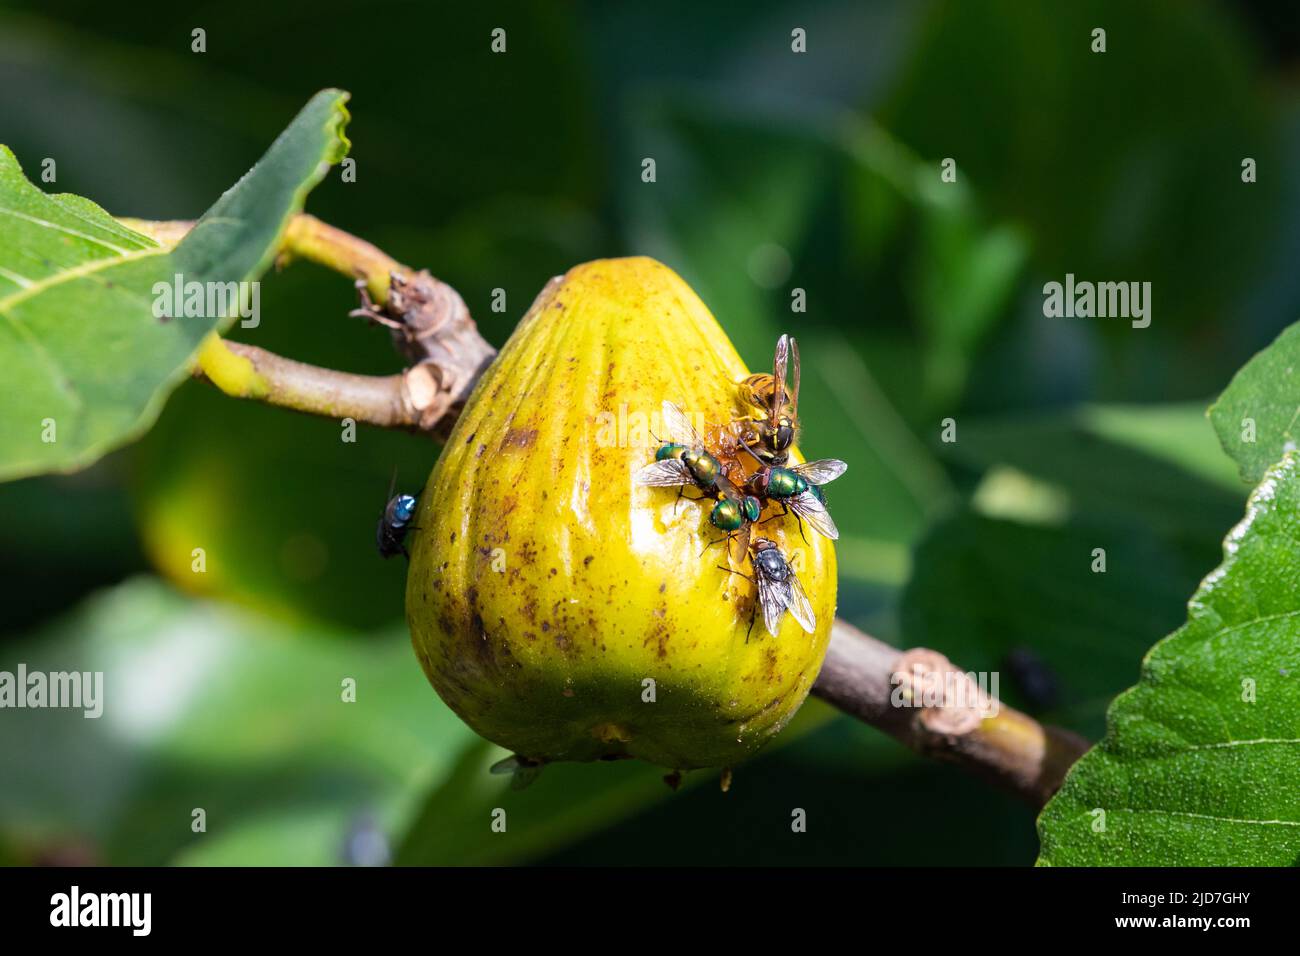 Blue bottle fly [ Calliphora vomitoria ],common green bottle fly[ Lucilia sericata ] and common wasp [ Vespula vulgaris ] feeding on ripe fig [ Ficus Stock Photo